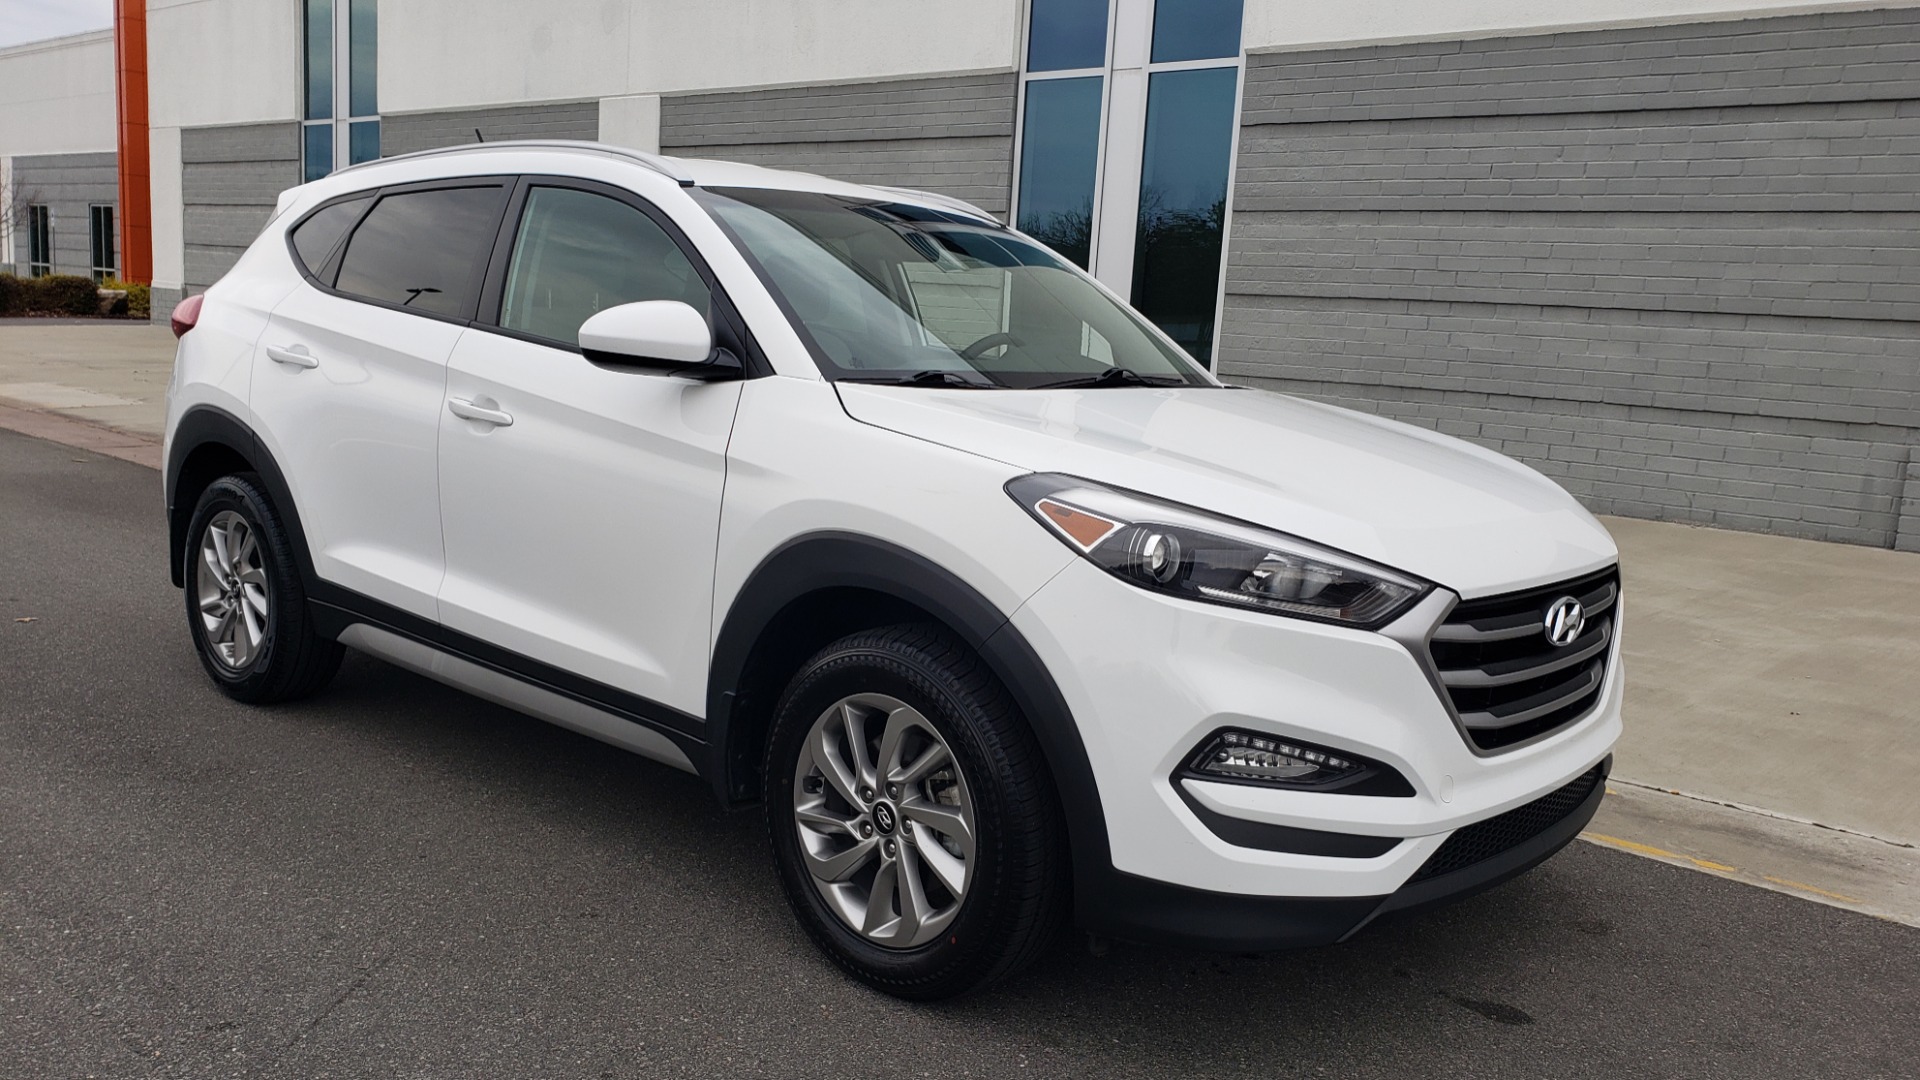 Used 2017 Hyundai TUCSON SE / 2.0L / 6-SPD AUTO / CLOTH / REARVIEW CAMERA for sale Sold at Formula Imports in Charlotte NC 28227 6